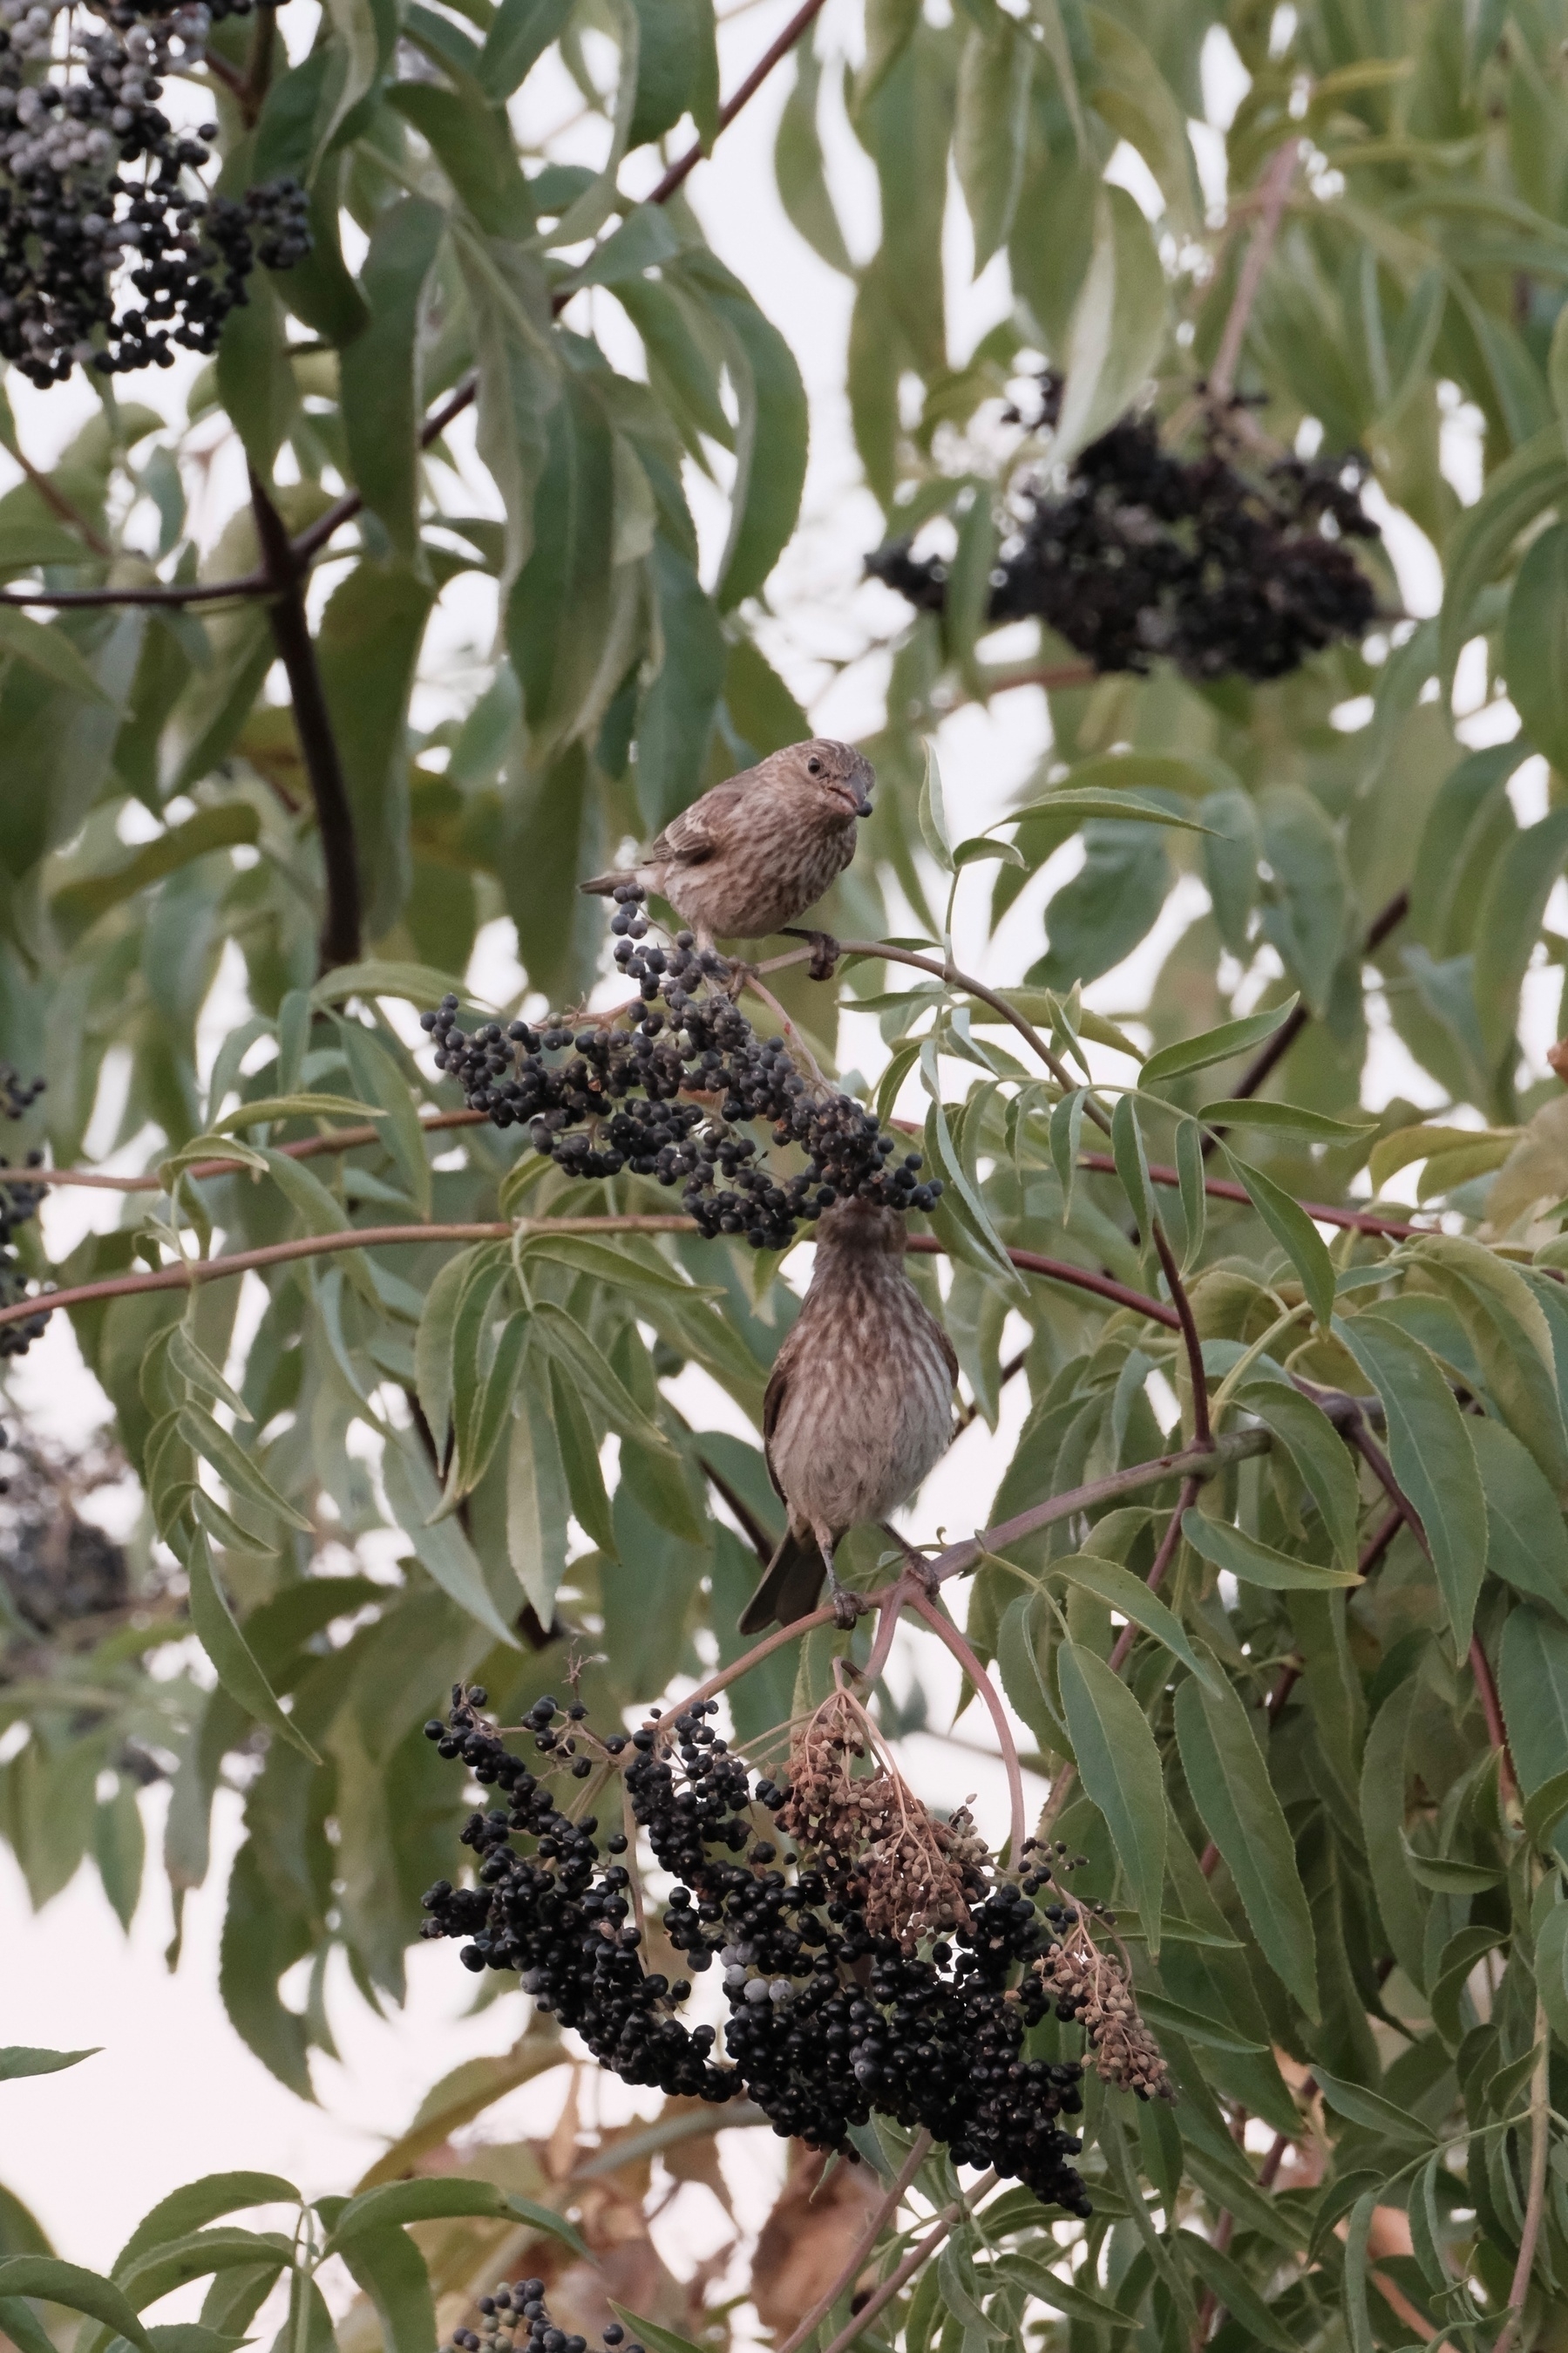 Two house finches are on top of two bunches of ripe elderberries, feasting on them. The upper most Finch has a Elderberry in its beak. The lower most finch is on a branch, reaching up into a bunch of berries. ￼